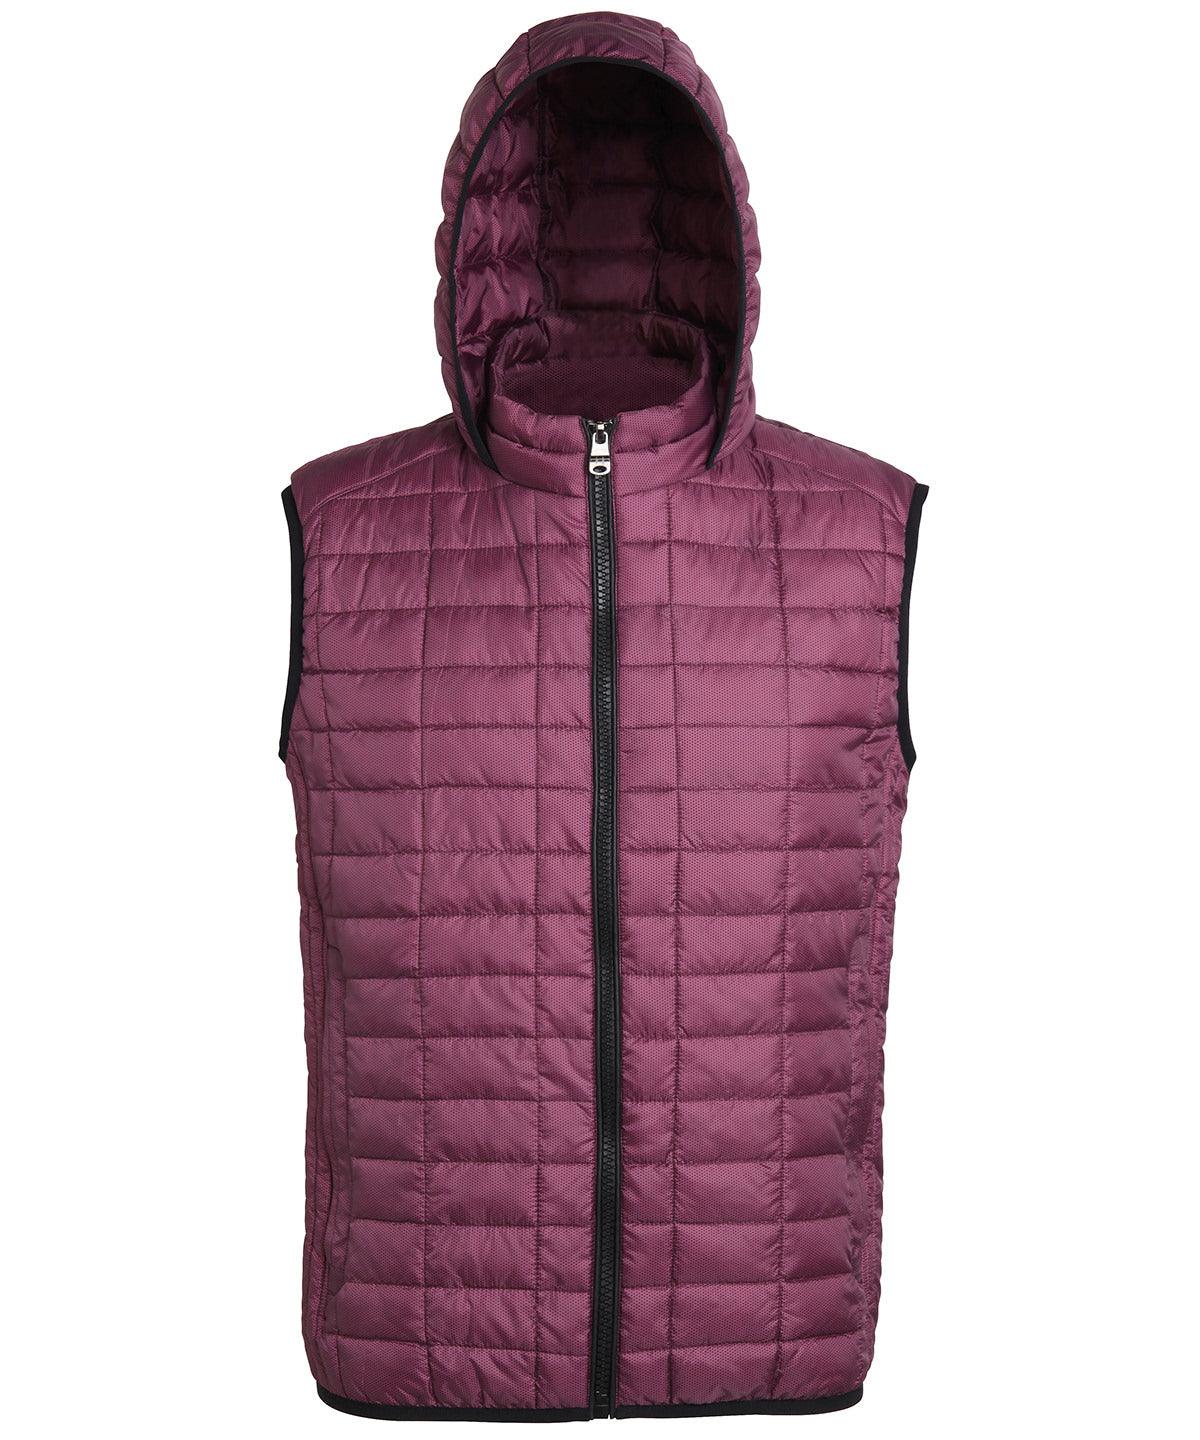 Mulberry - Women's honeycomb hooded gilet Body Warmers 2786 Gilets and Bodywarmers, Jackets & Coats, Padded & Insulation, Rebrandable, Women's Fashion Schoolwear Centres